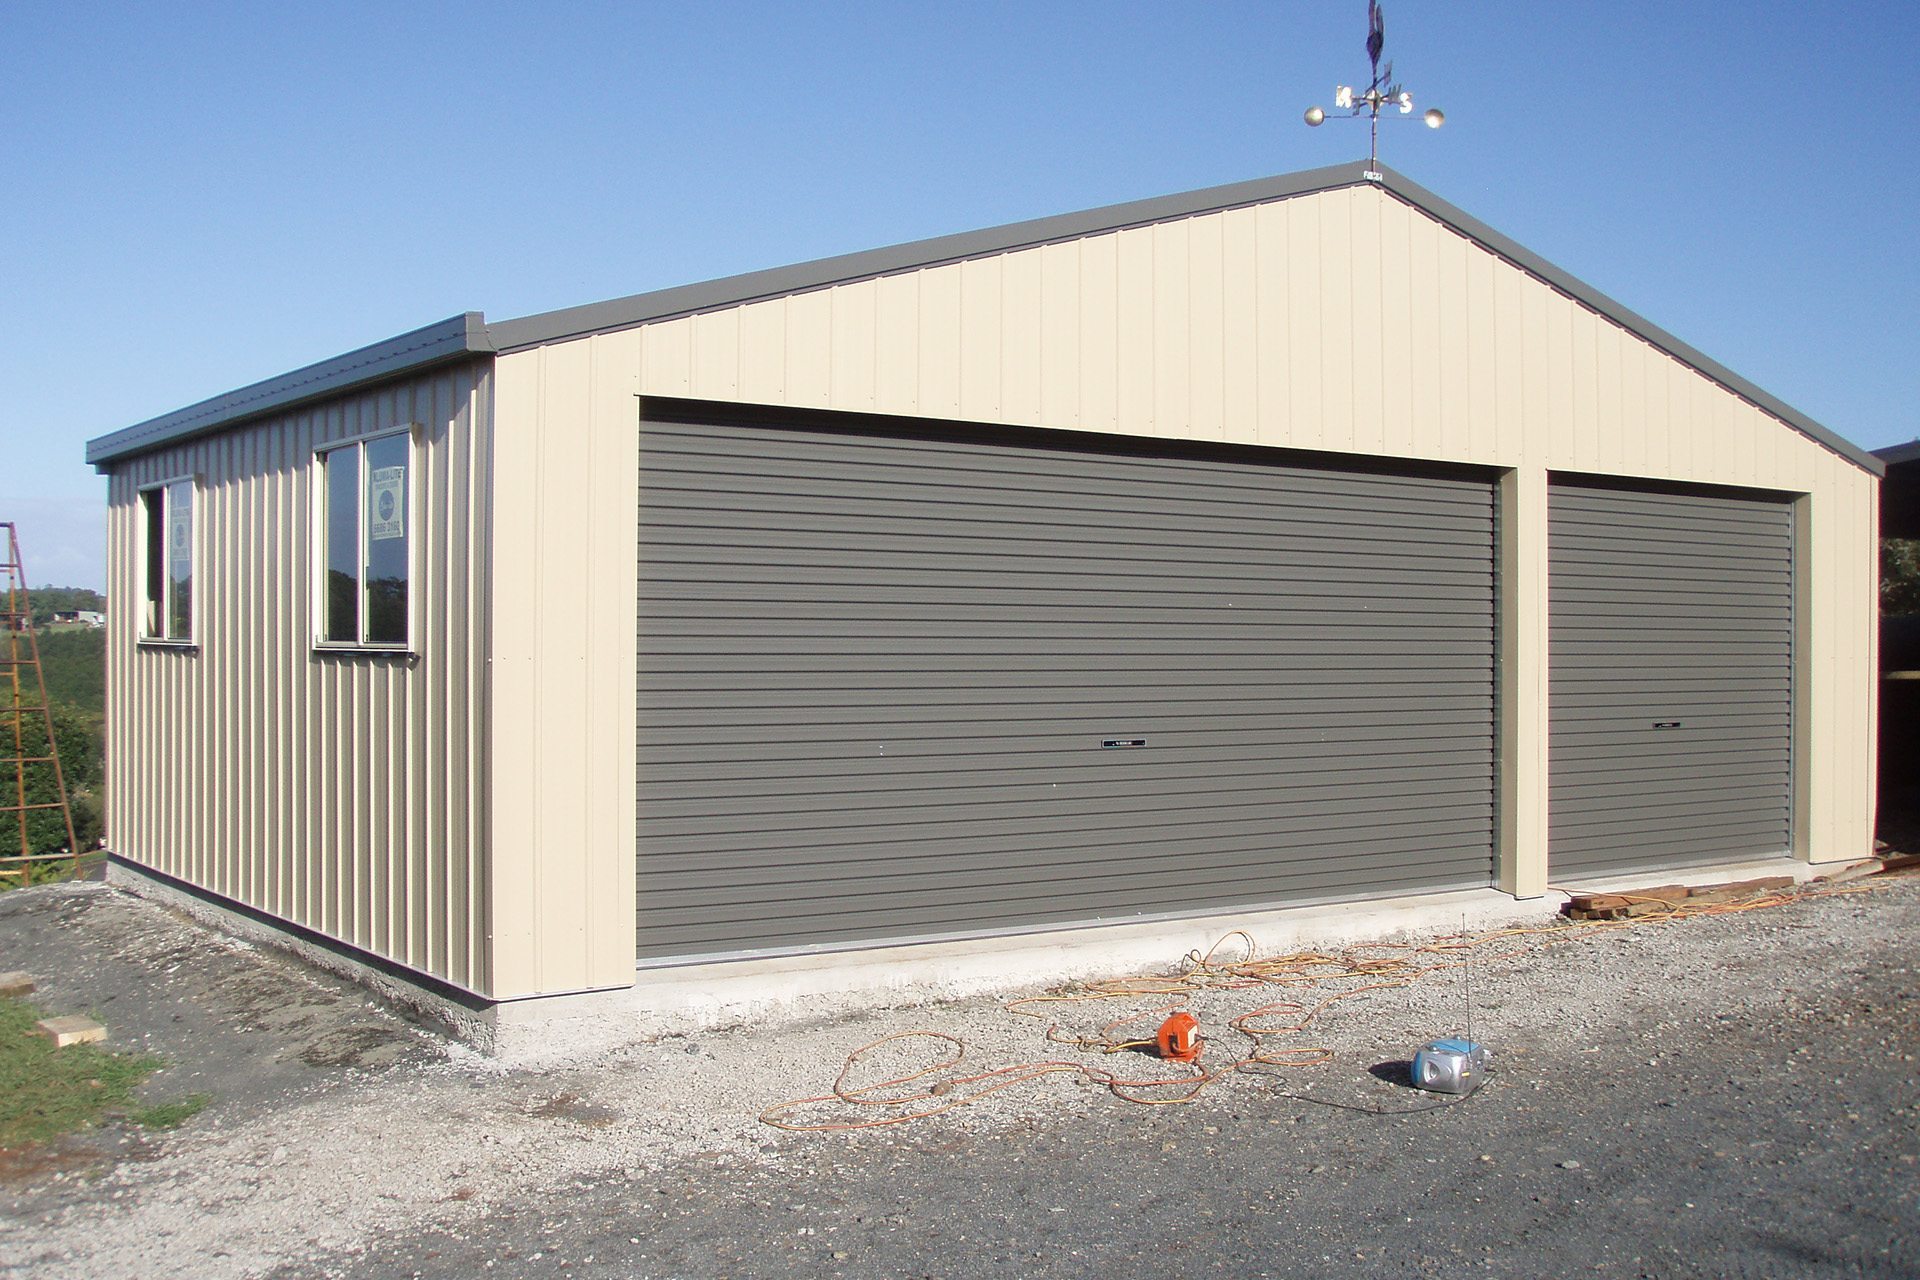 Garage sheds to protect vehicles